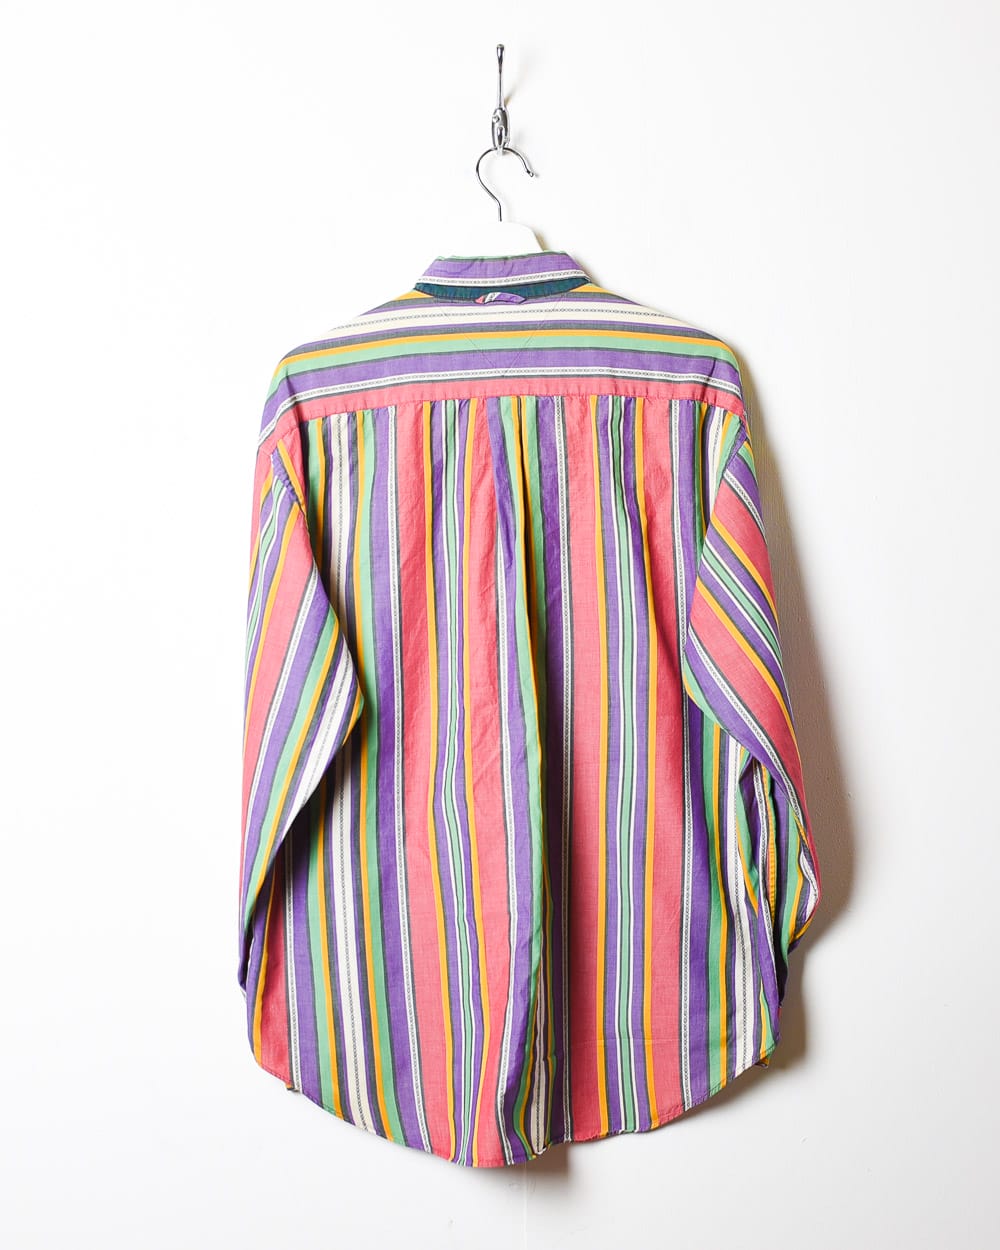 Multicolour Tommy Hilfiger Striped Shirt - Large